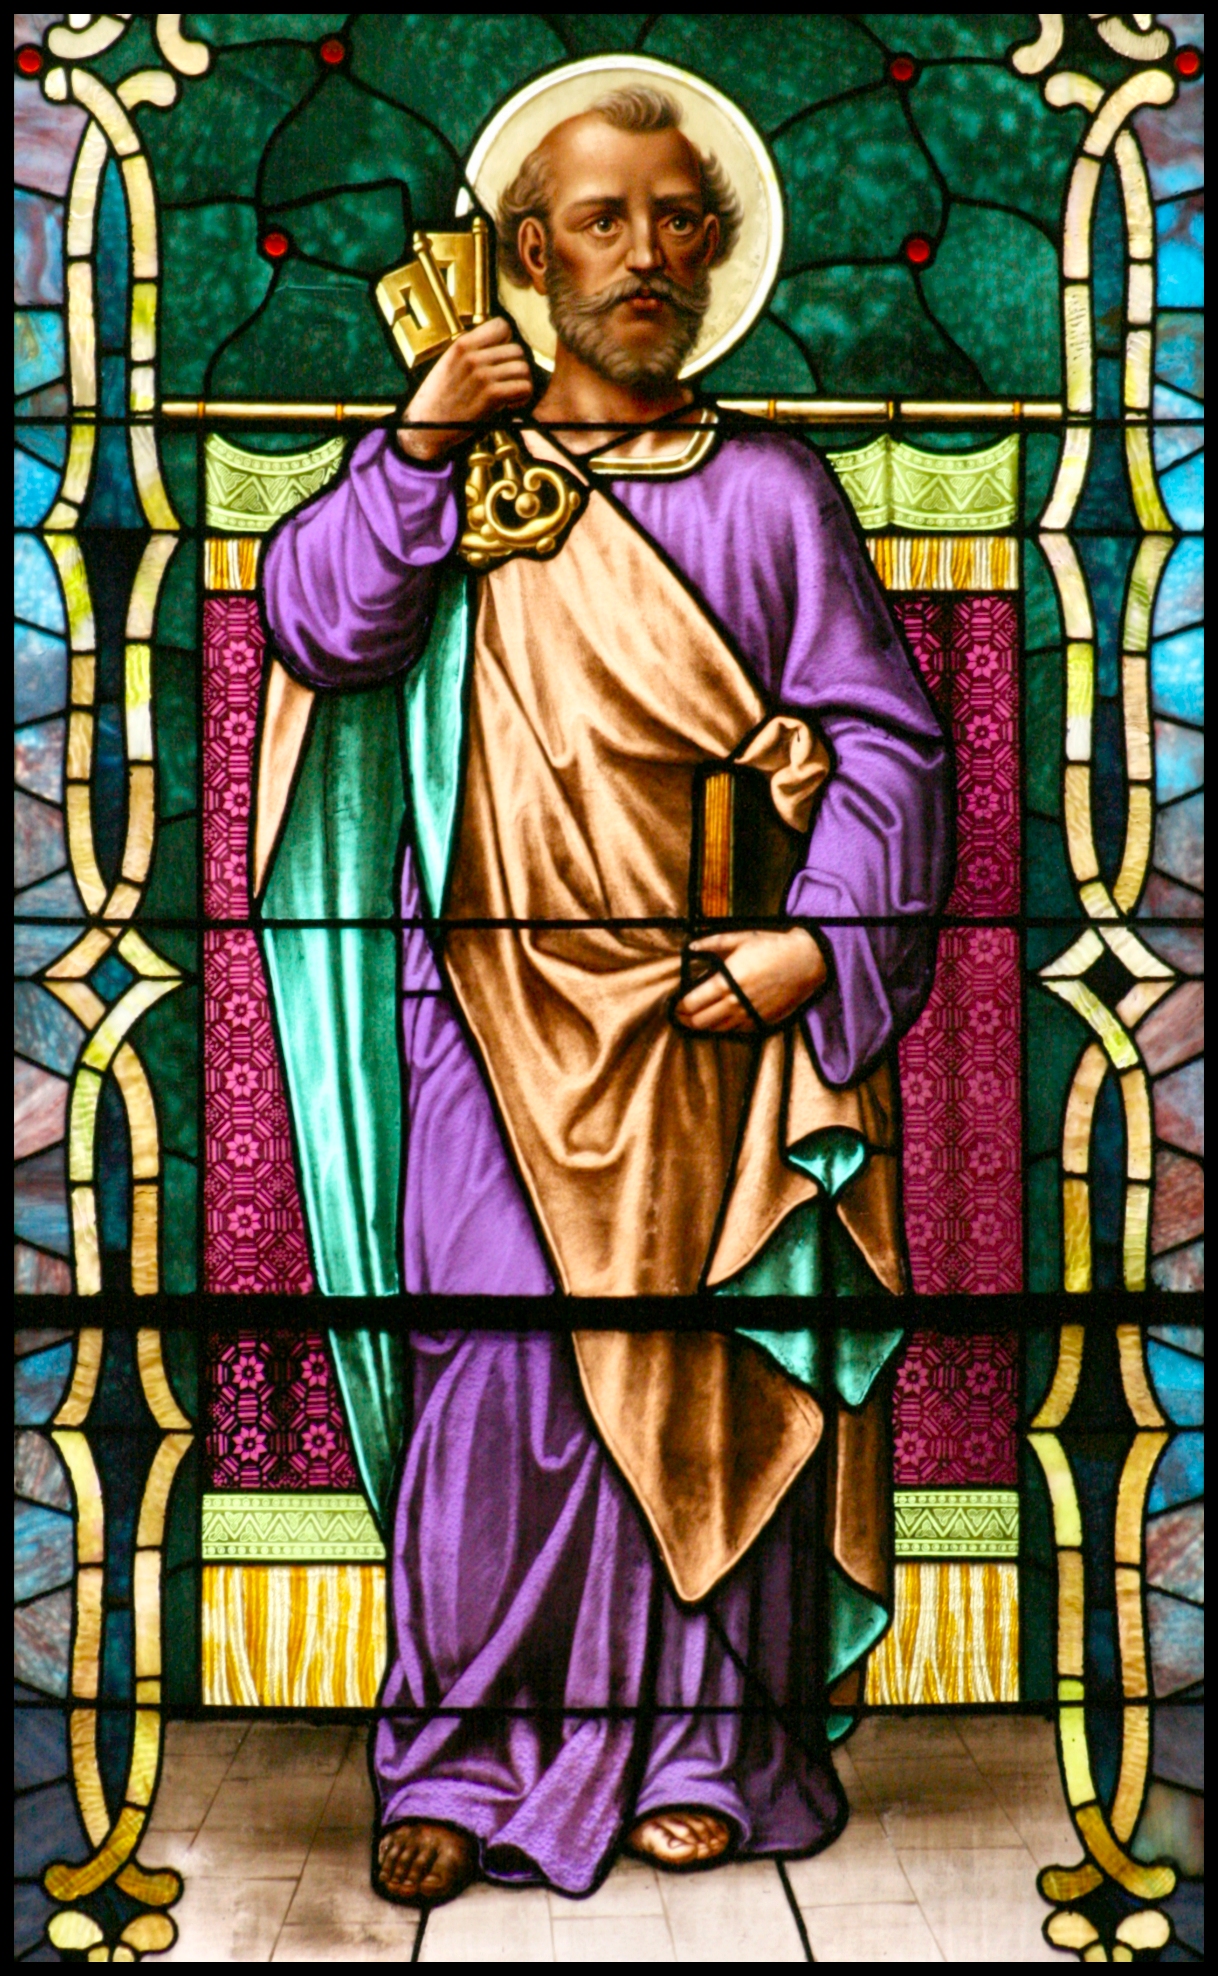 ST. PETER IN STAINED GLASS